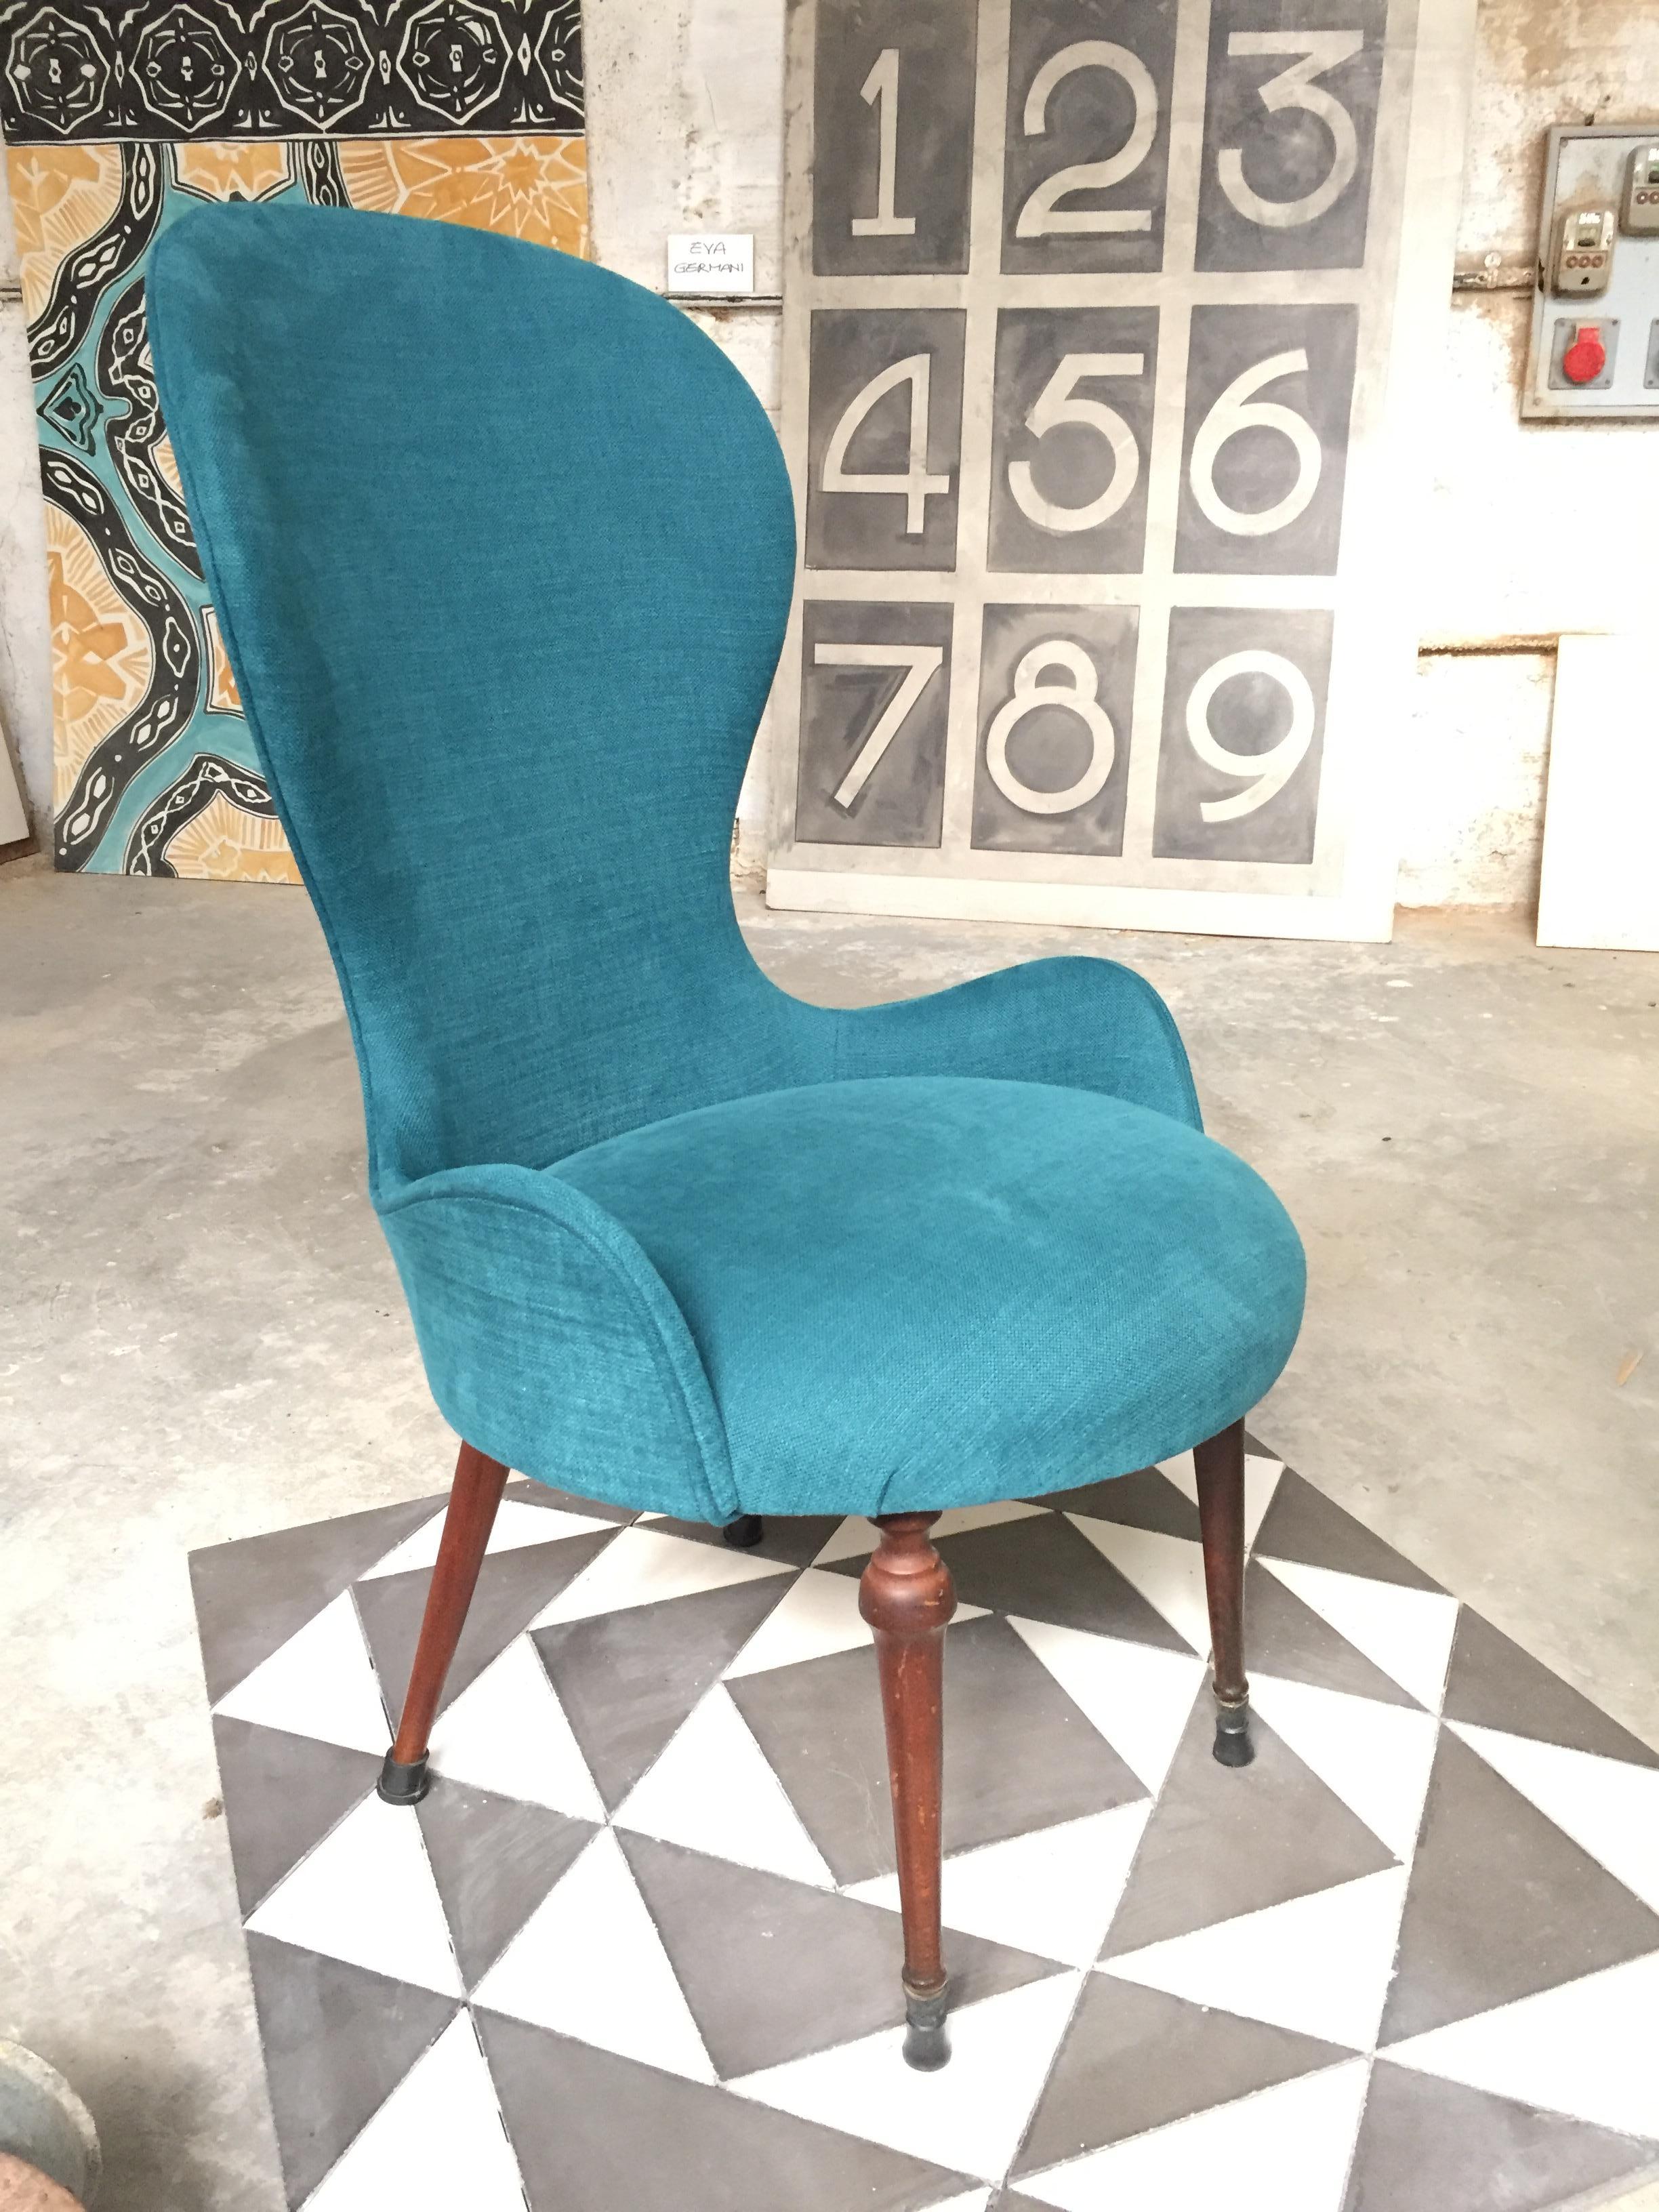 Art Deco Déco High-Backed Italian Petrol Blue Lounge Chairs, 1940s For Sale